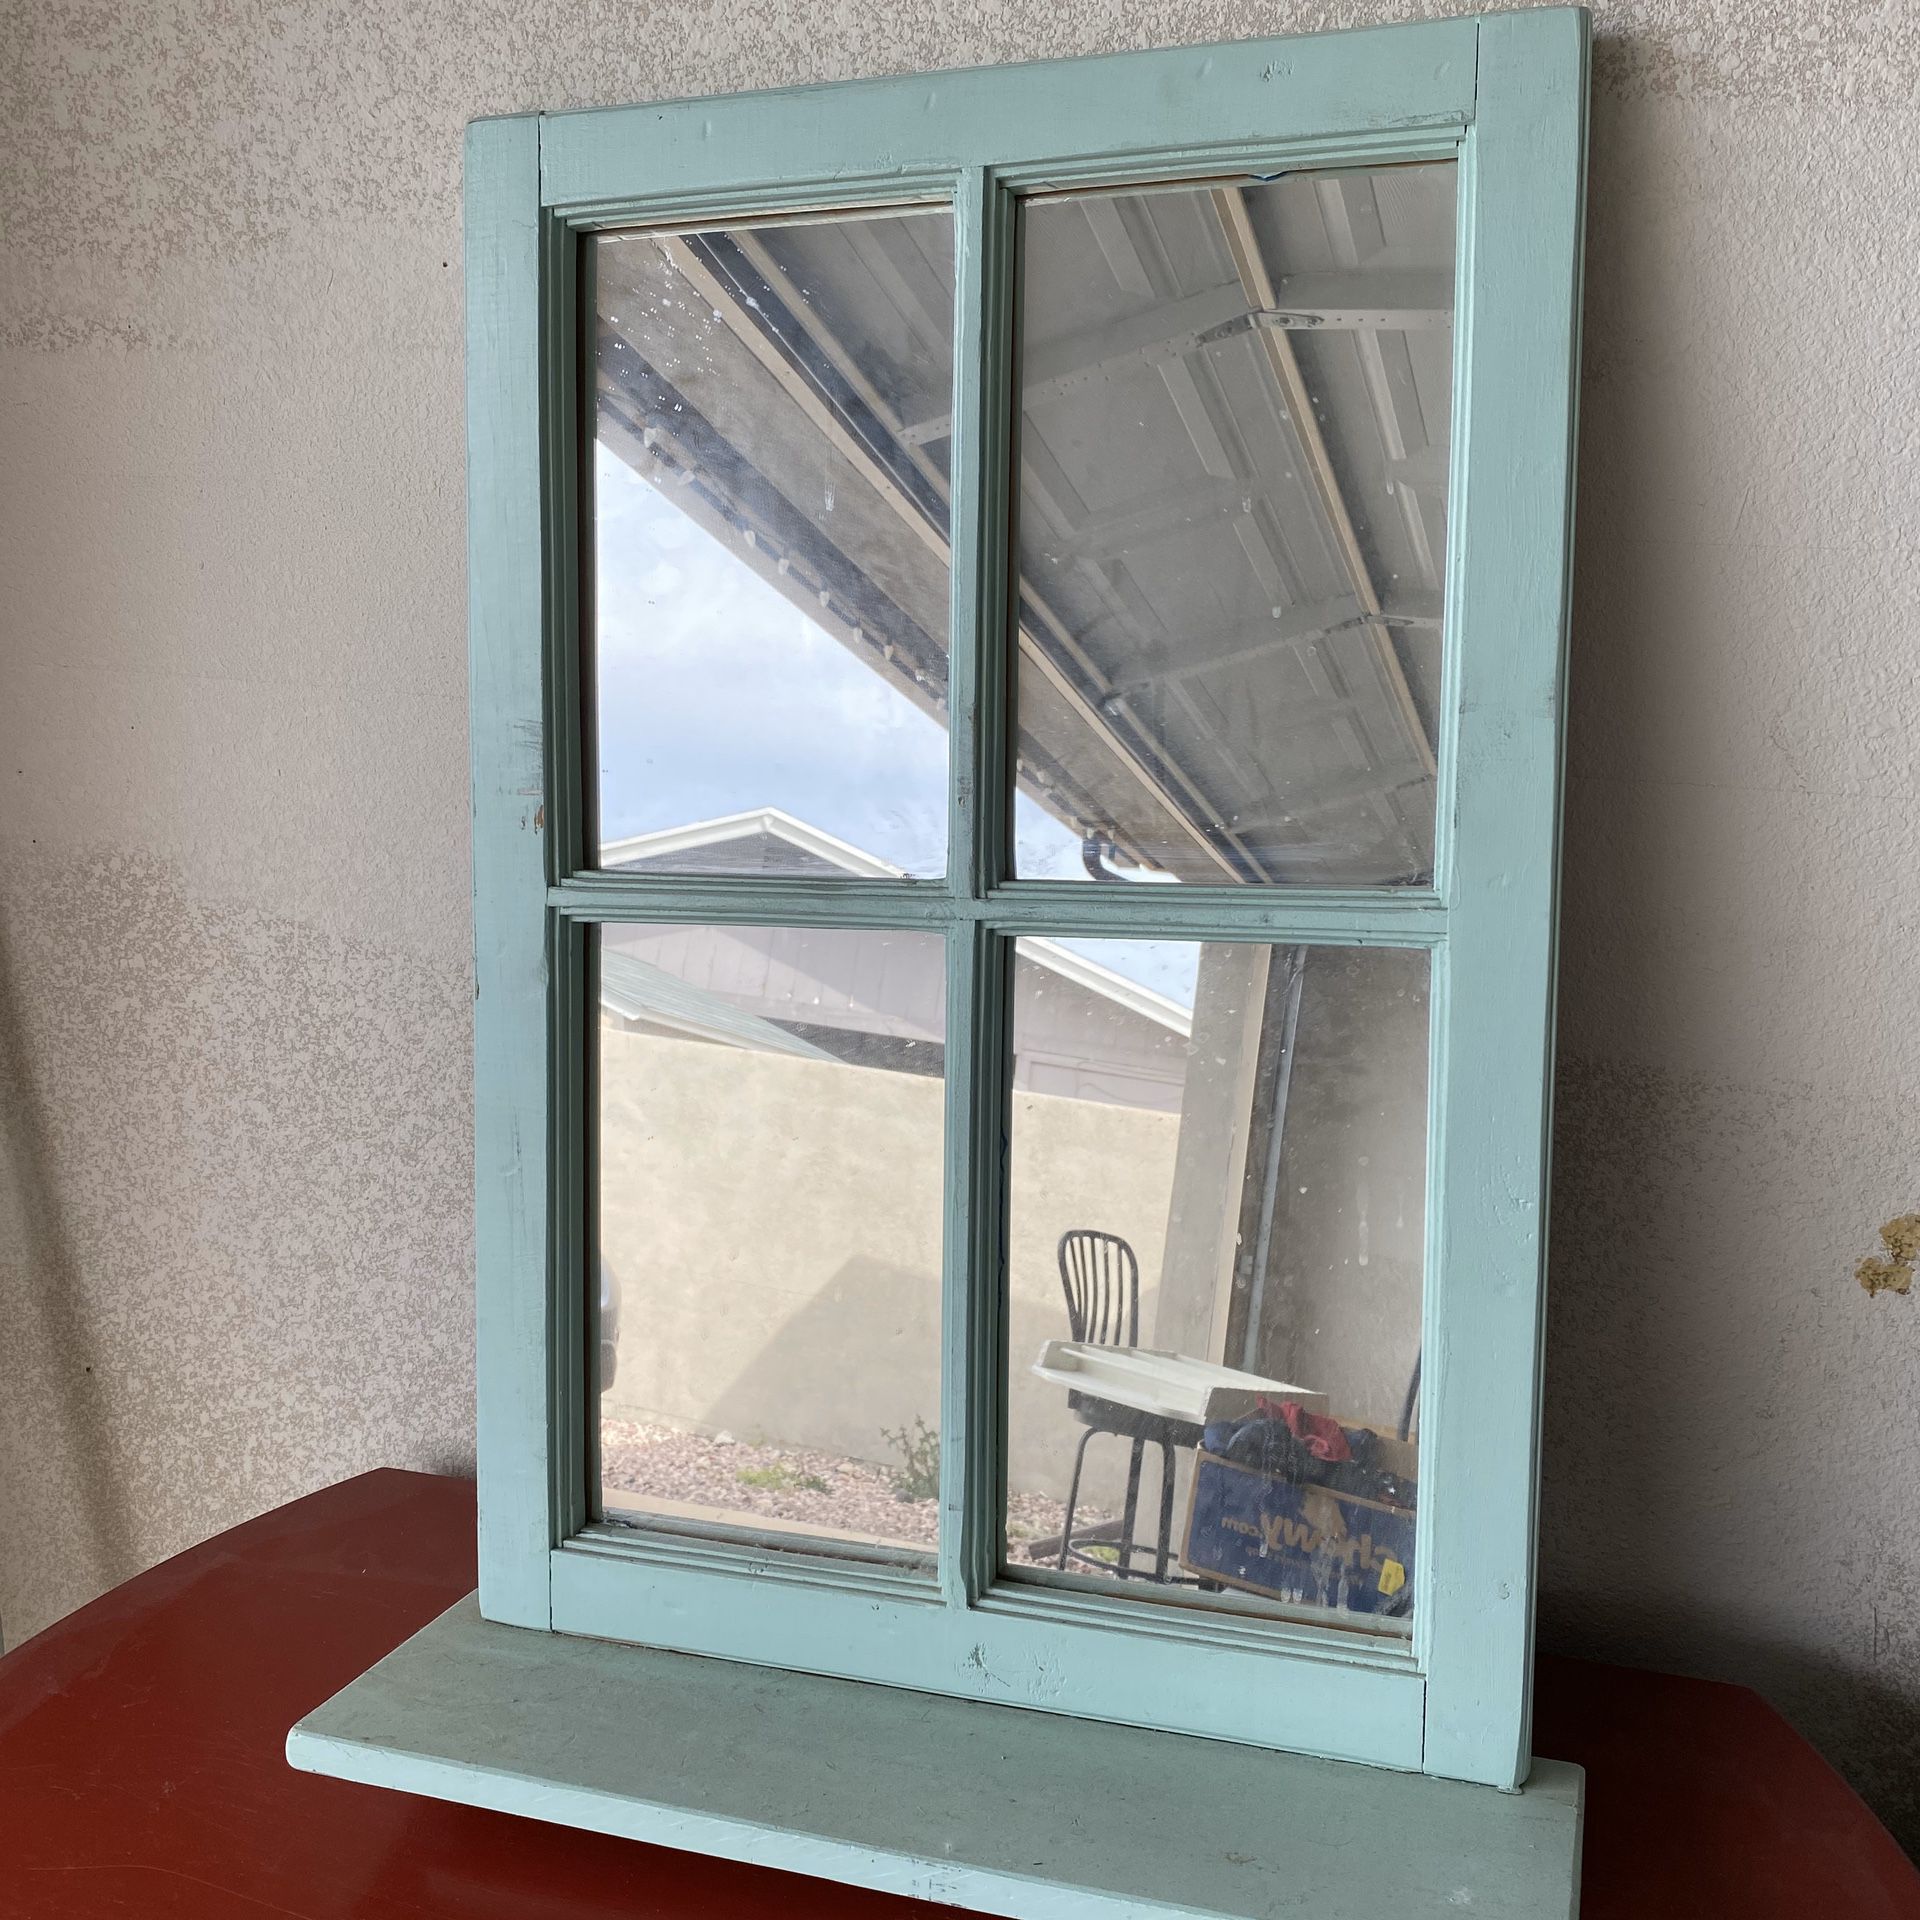 Vintage wooden frame Cottage window style mirror Approximately 29” x 22” Vintage wood painted aqua - looks shabby chic or could use a painting